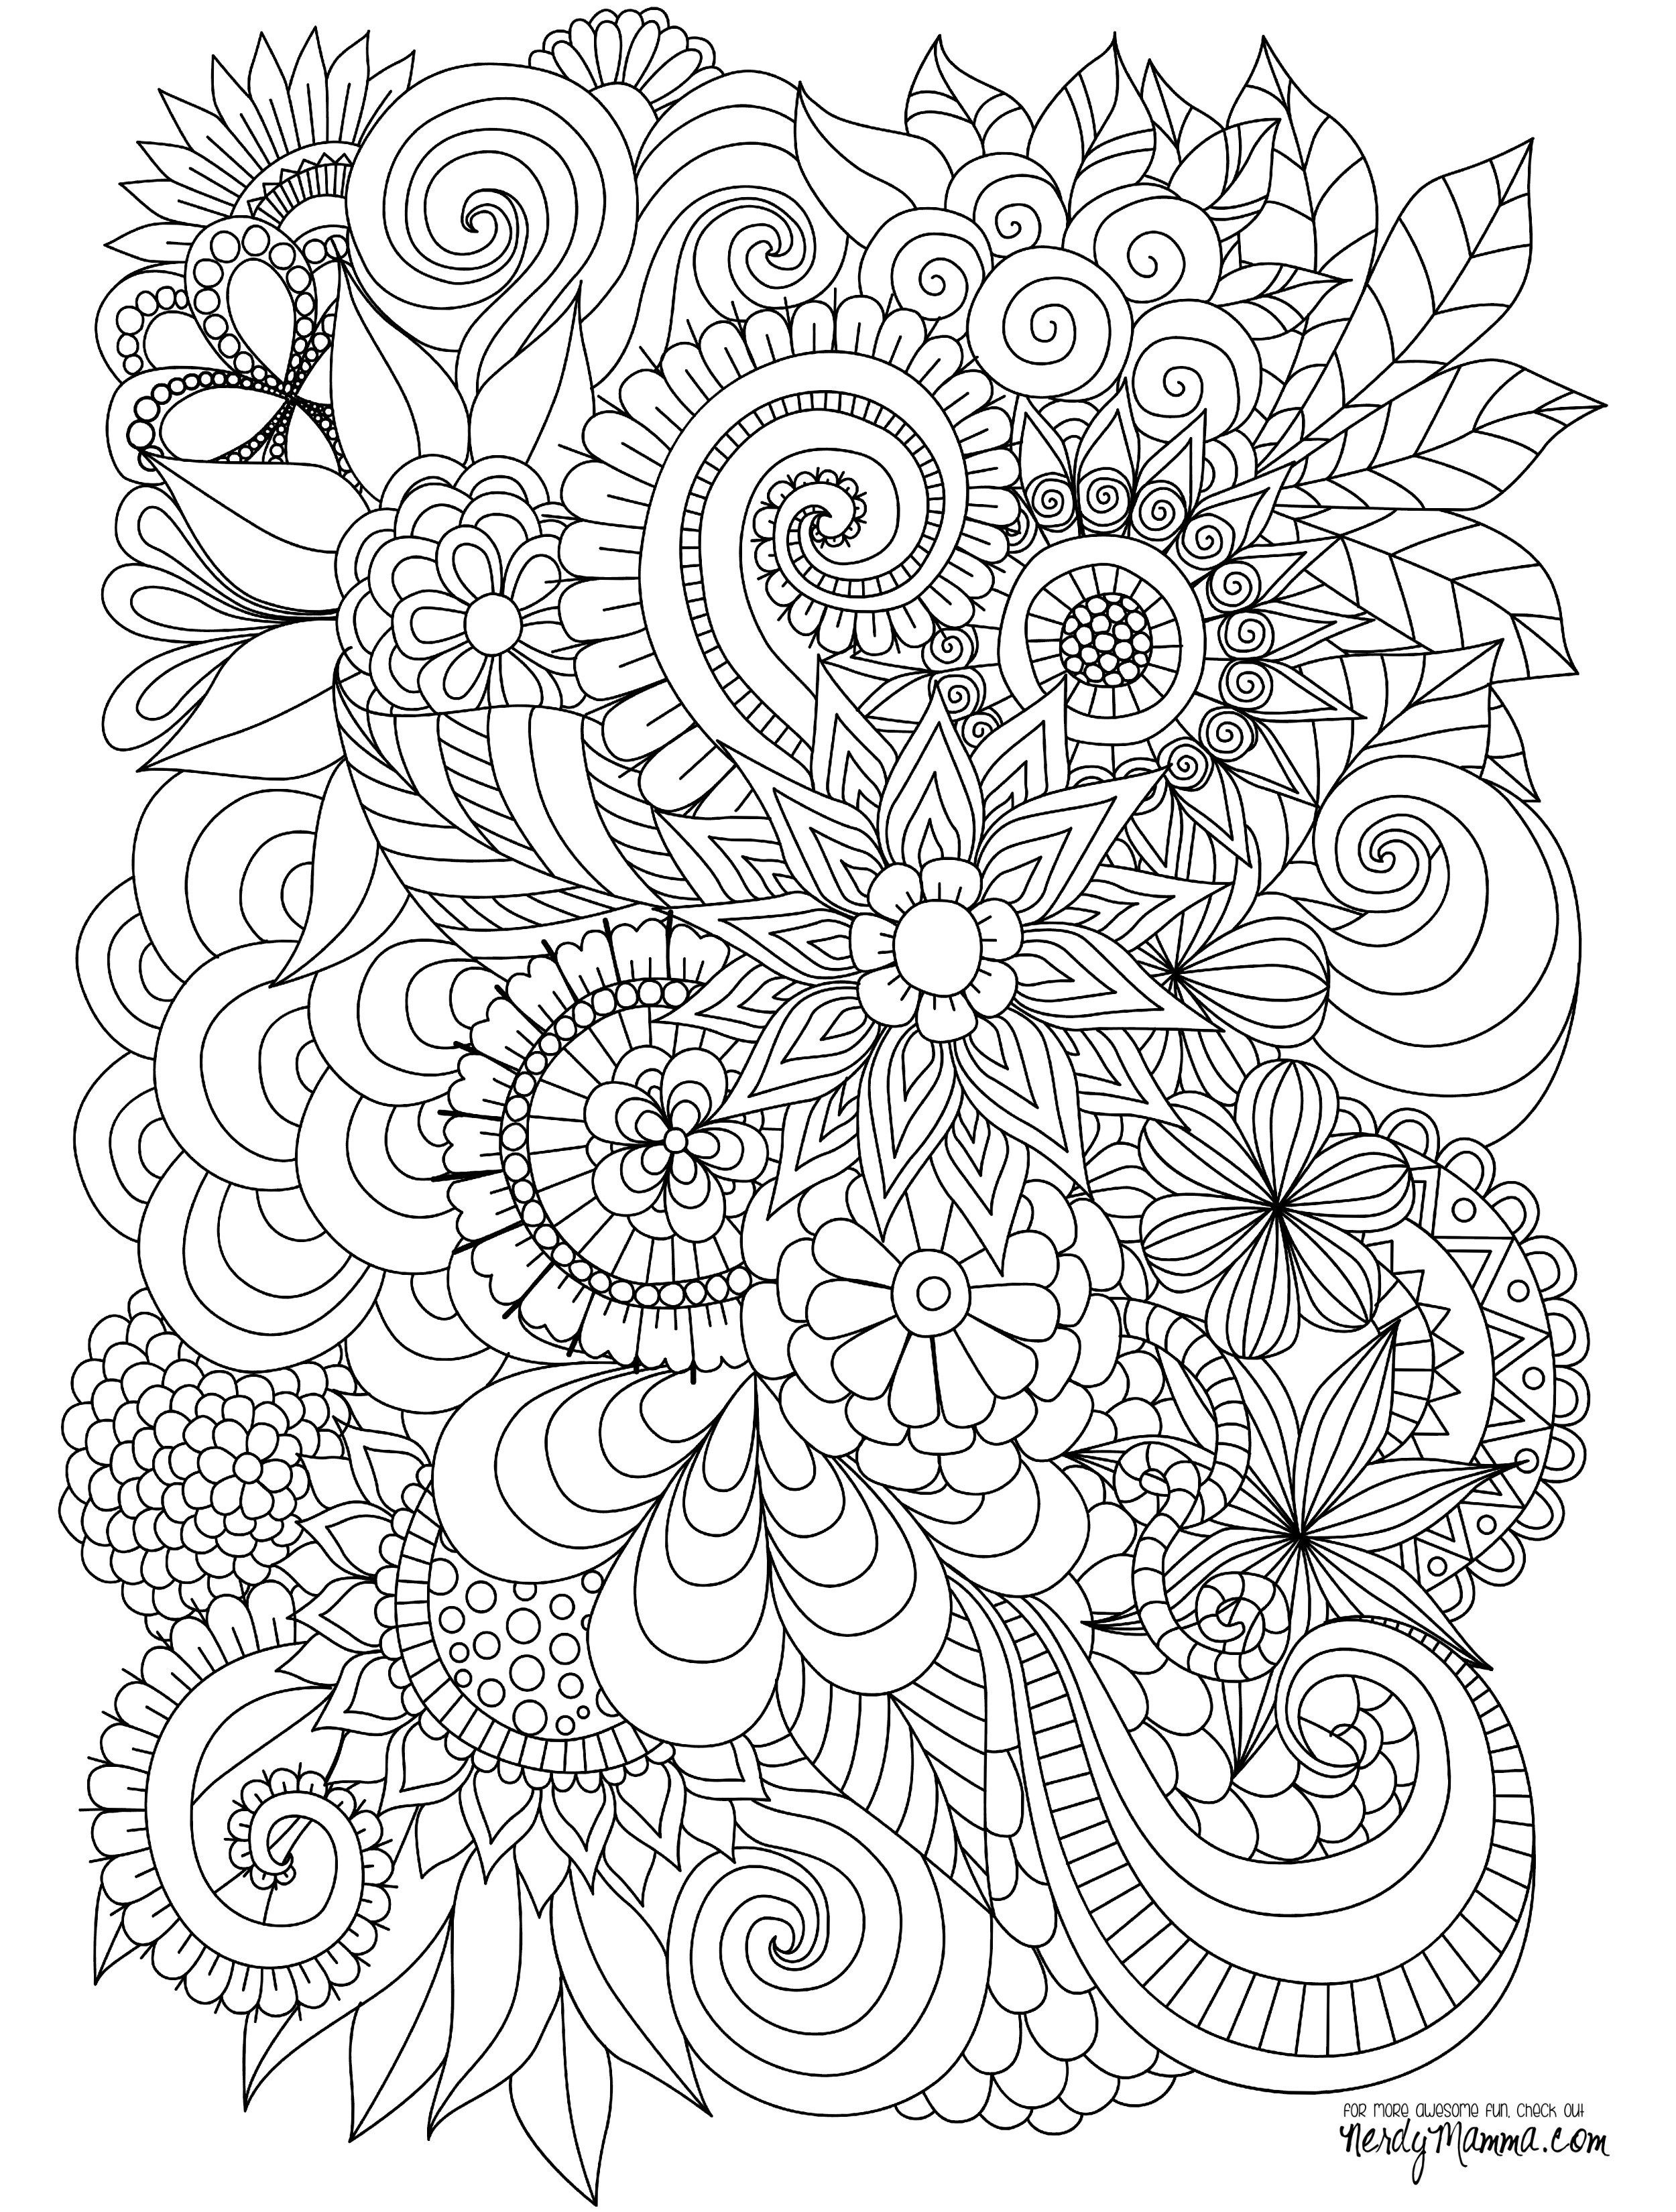 Flowers Abstract Coloring Pages Colouring Adult Detailed Advanced - Free Printable Flower Coloring Pages For Adults